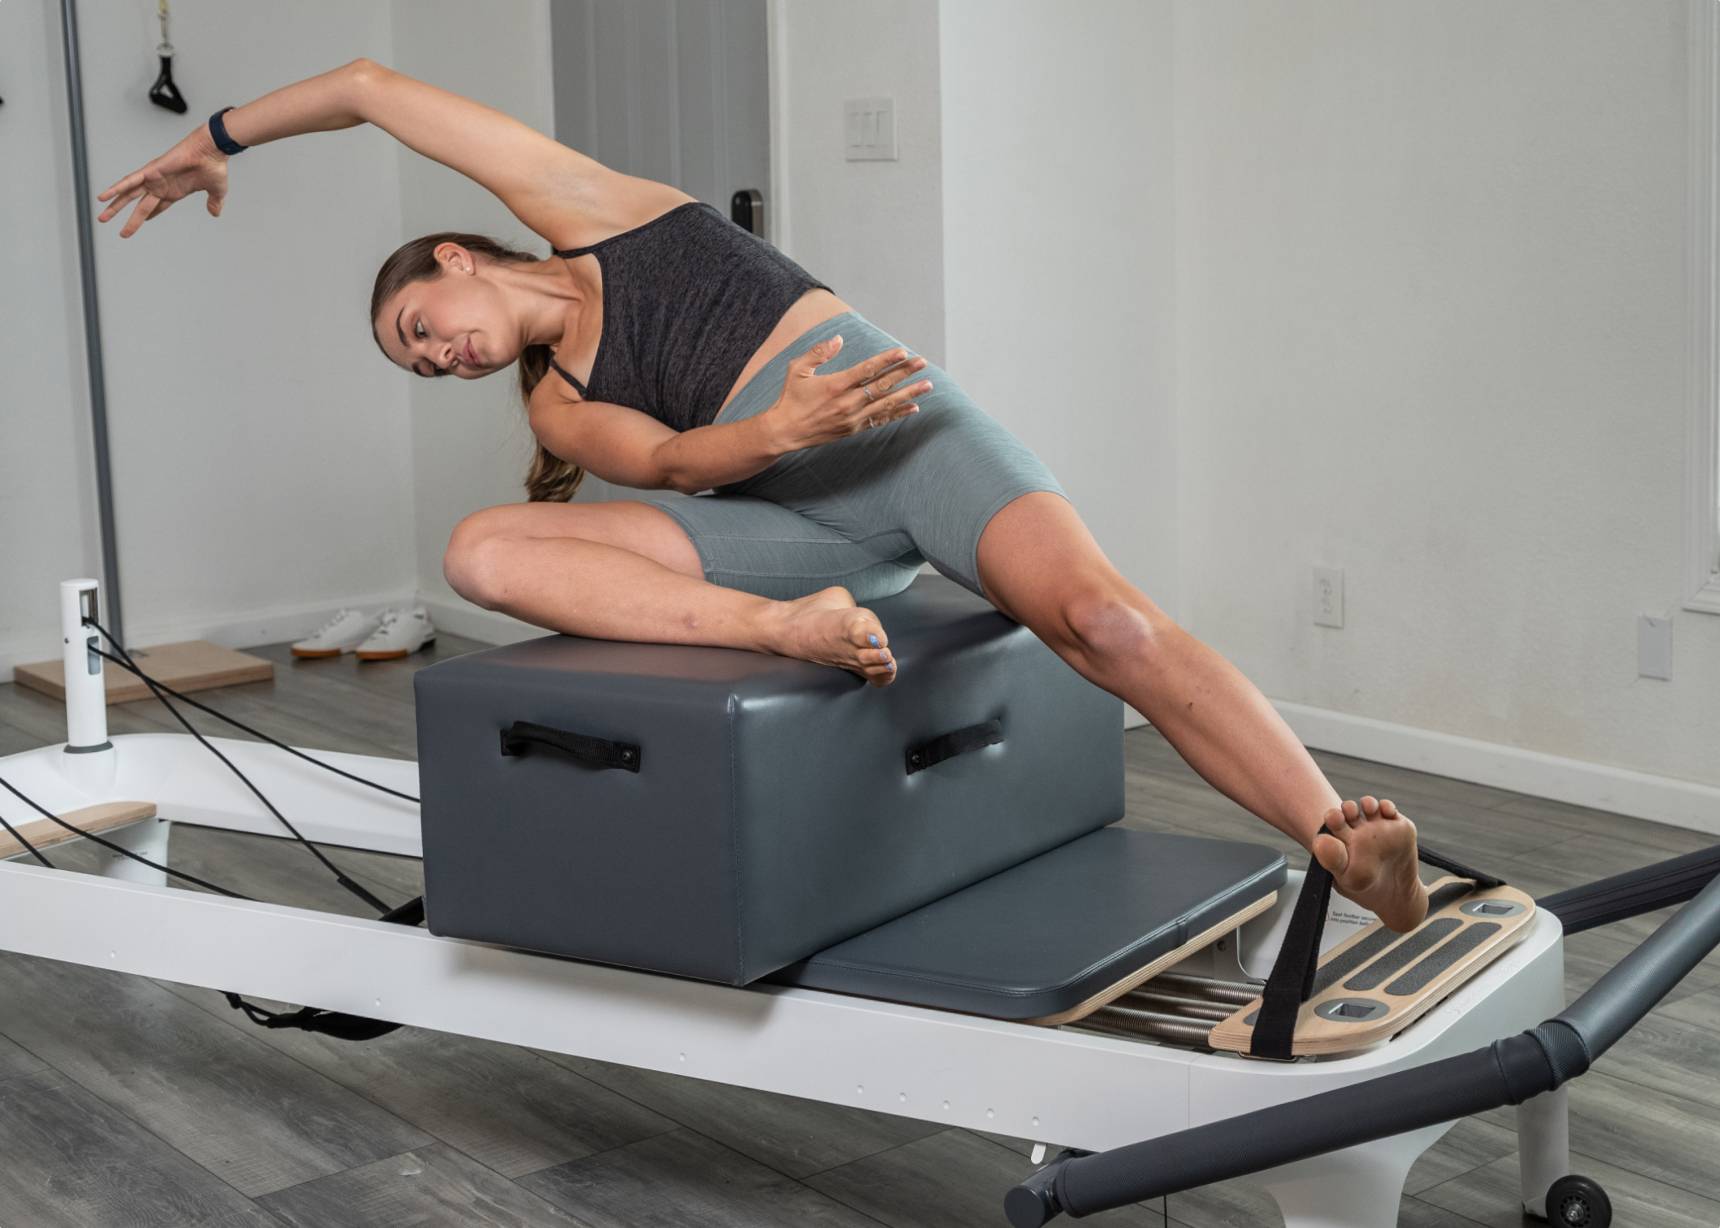 Woman stretching on a sitting box, using Pilates foot straps attached to a reformer.